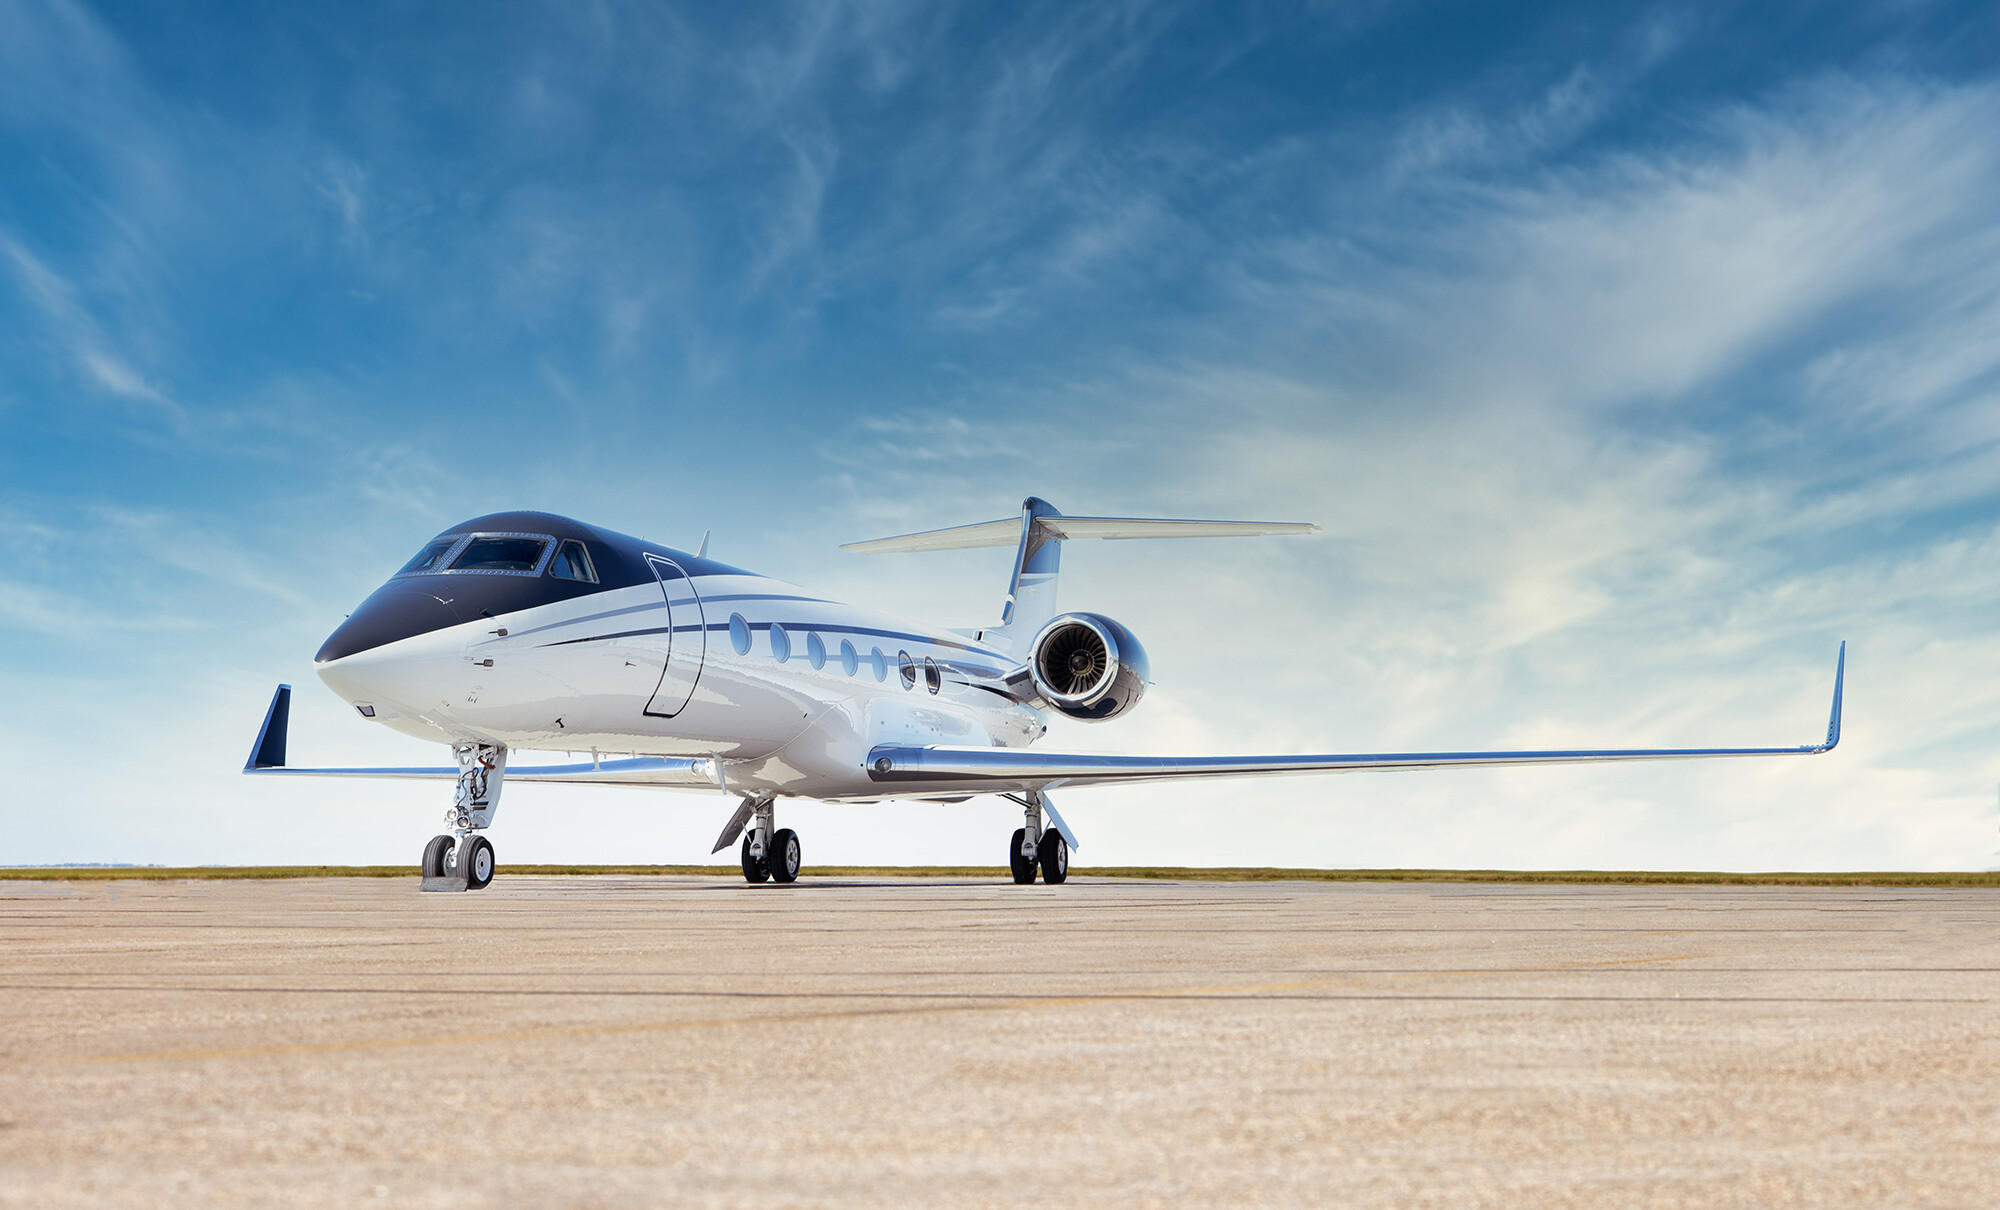 Free air charter quotes for cast & crew. Film, movie & tv production charter flight help